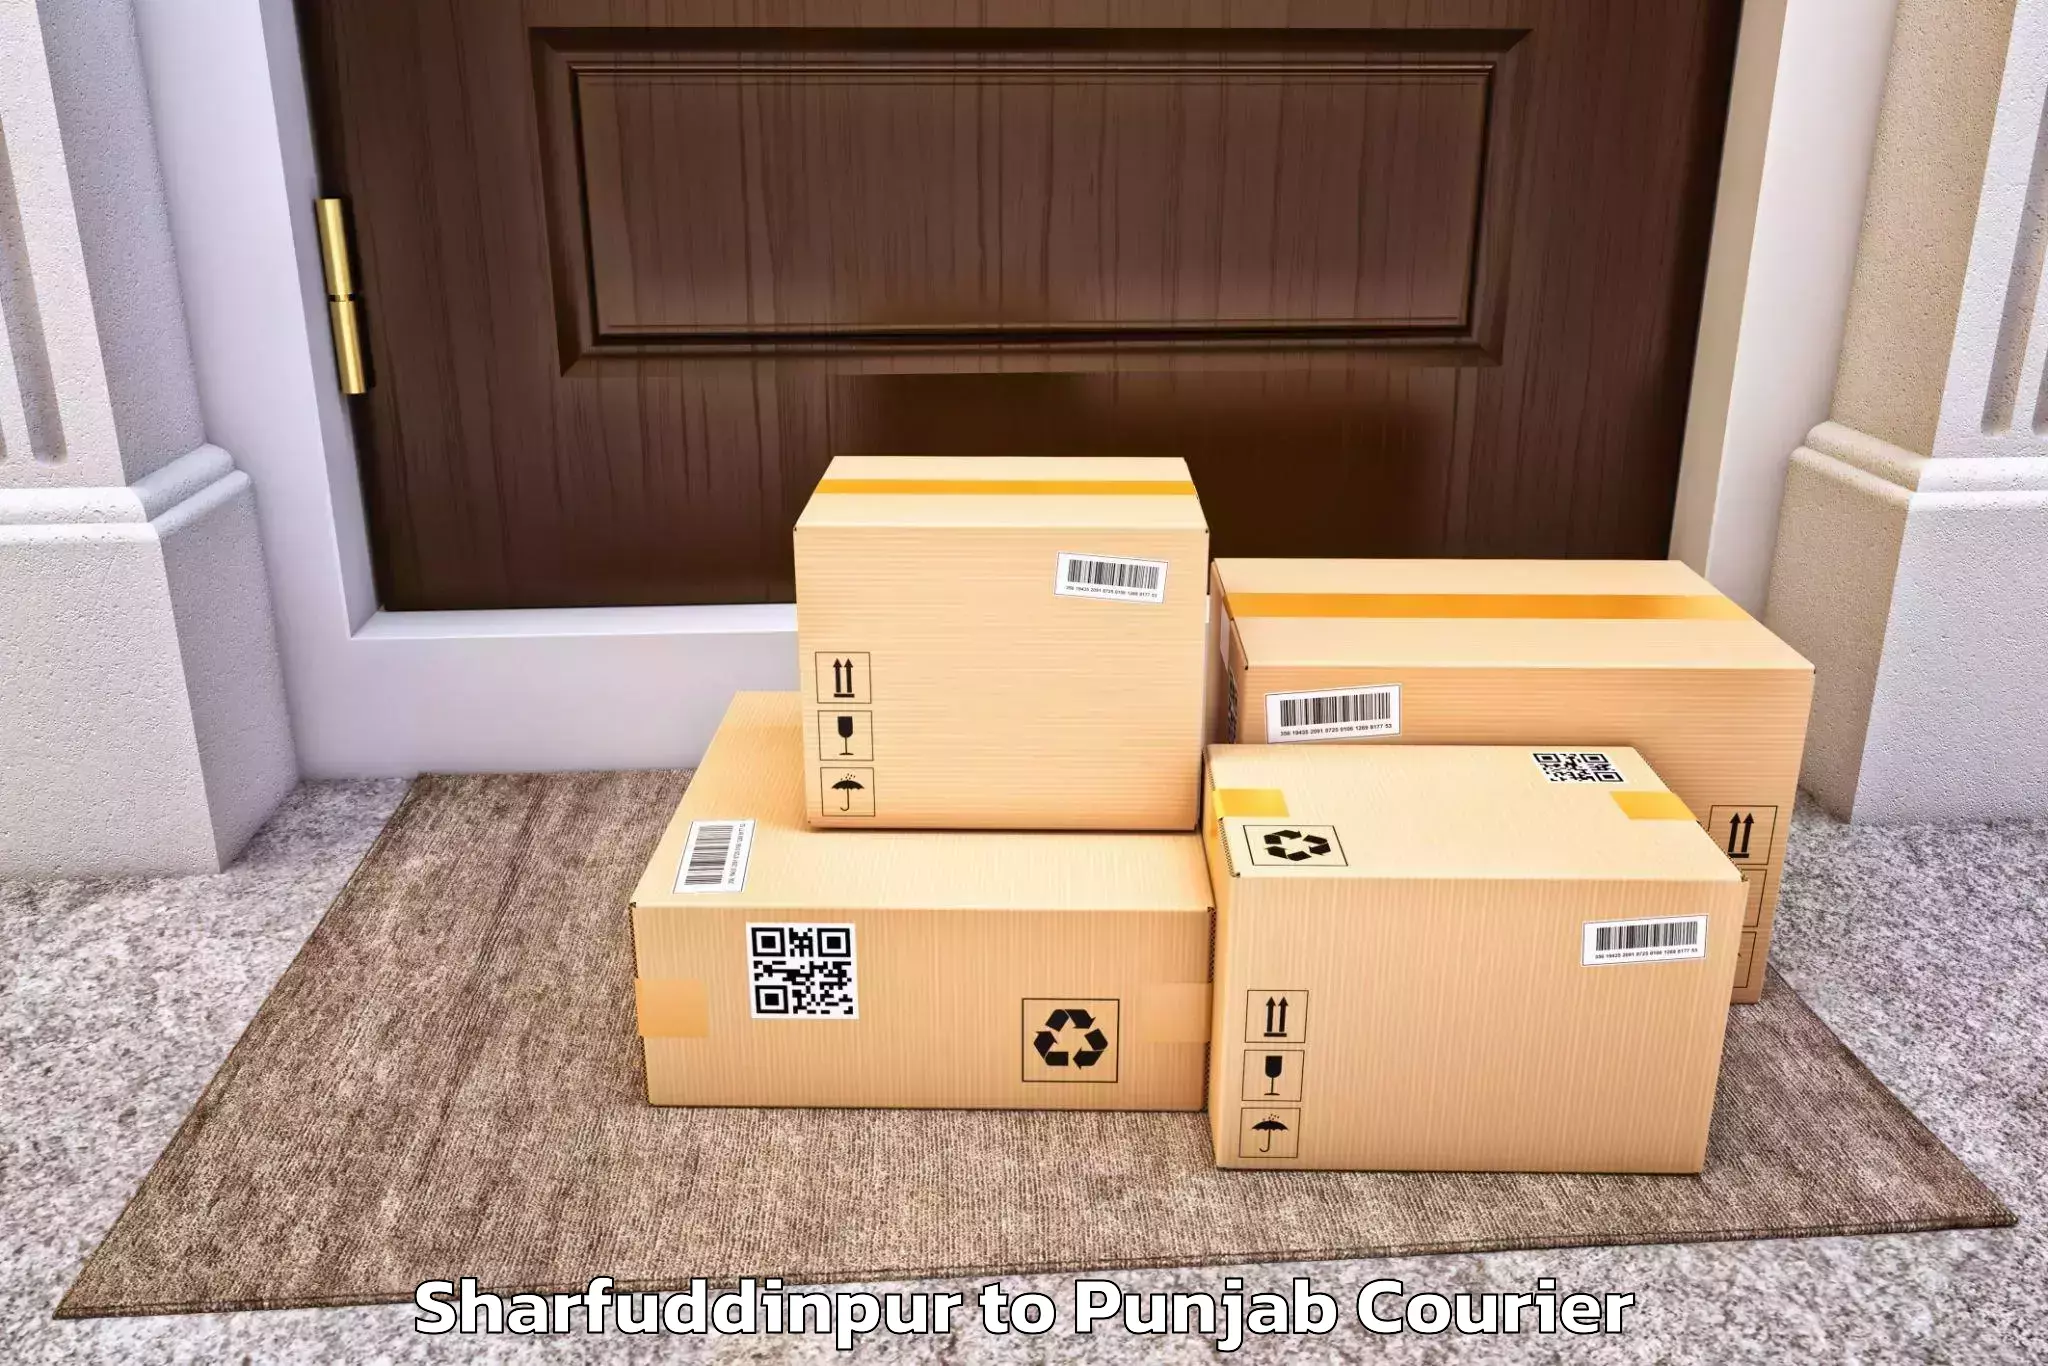 Professional moving company in Sharfuddinpur to Amritsar